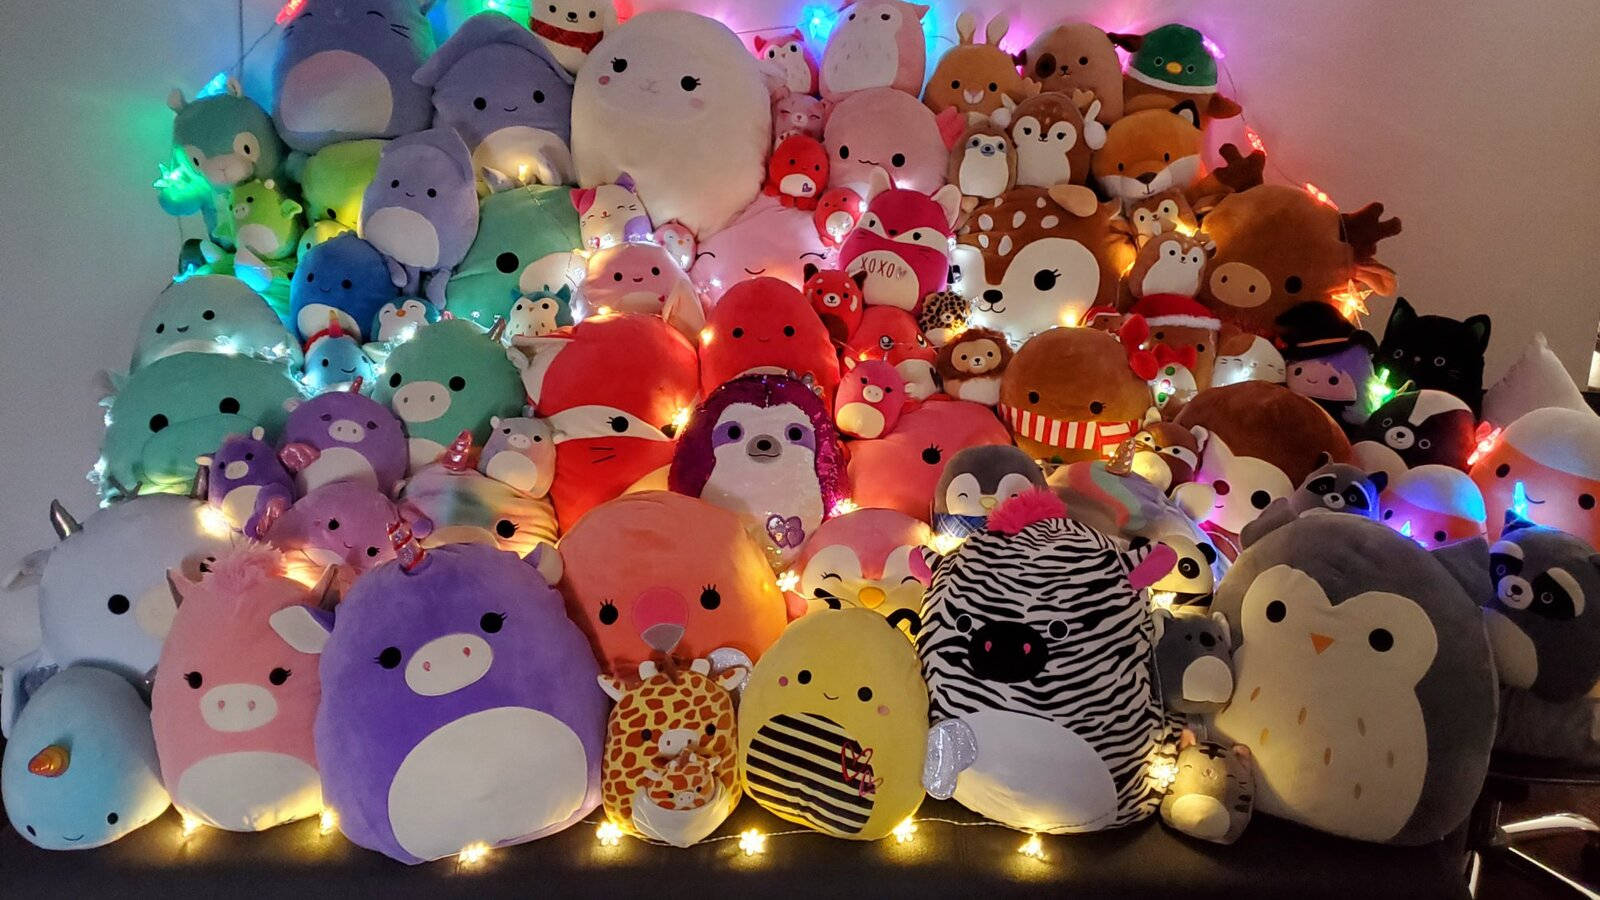 Caption: Vibrant Collection Of Playful Squishmallows Background